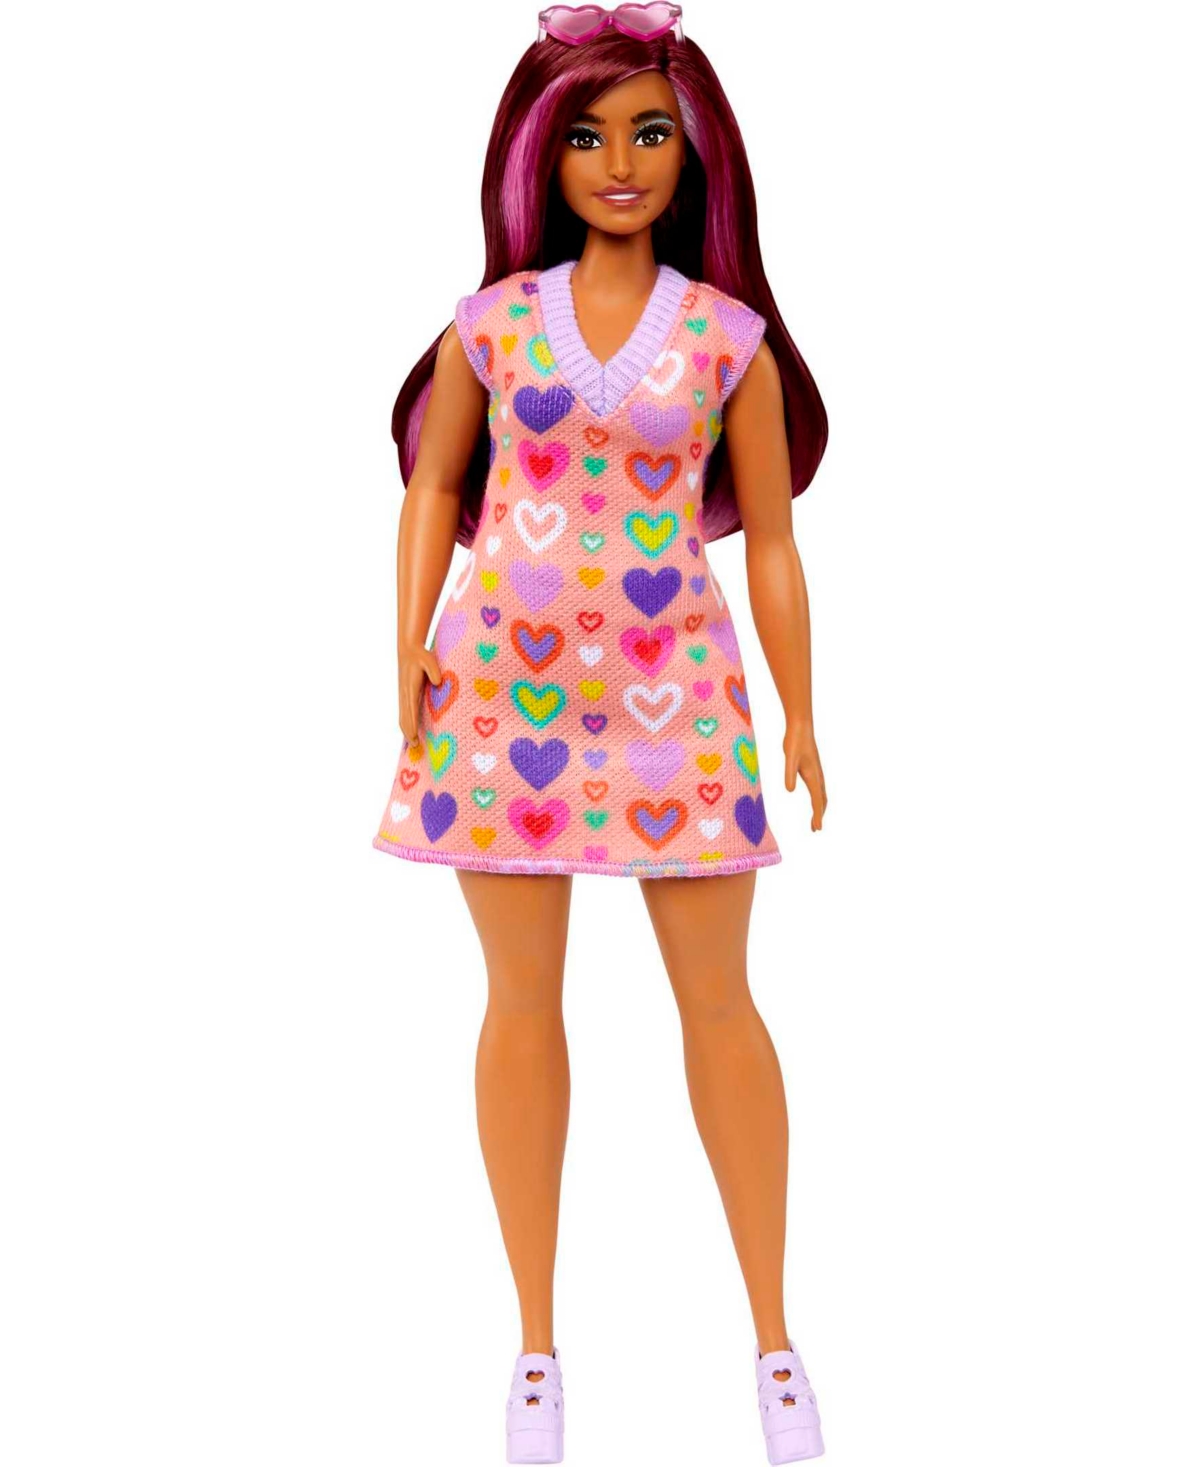 Shop Barbie Fashionistas Doll 207 With Pink-streaked Hair And Heart Dress In Multi-color